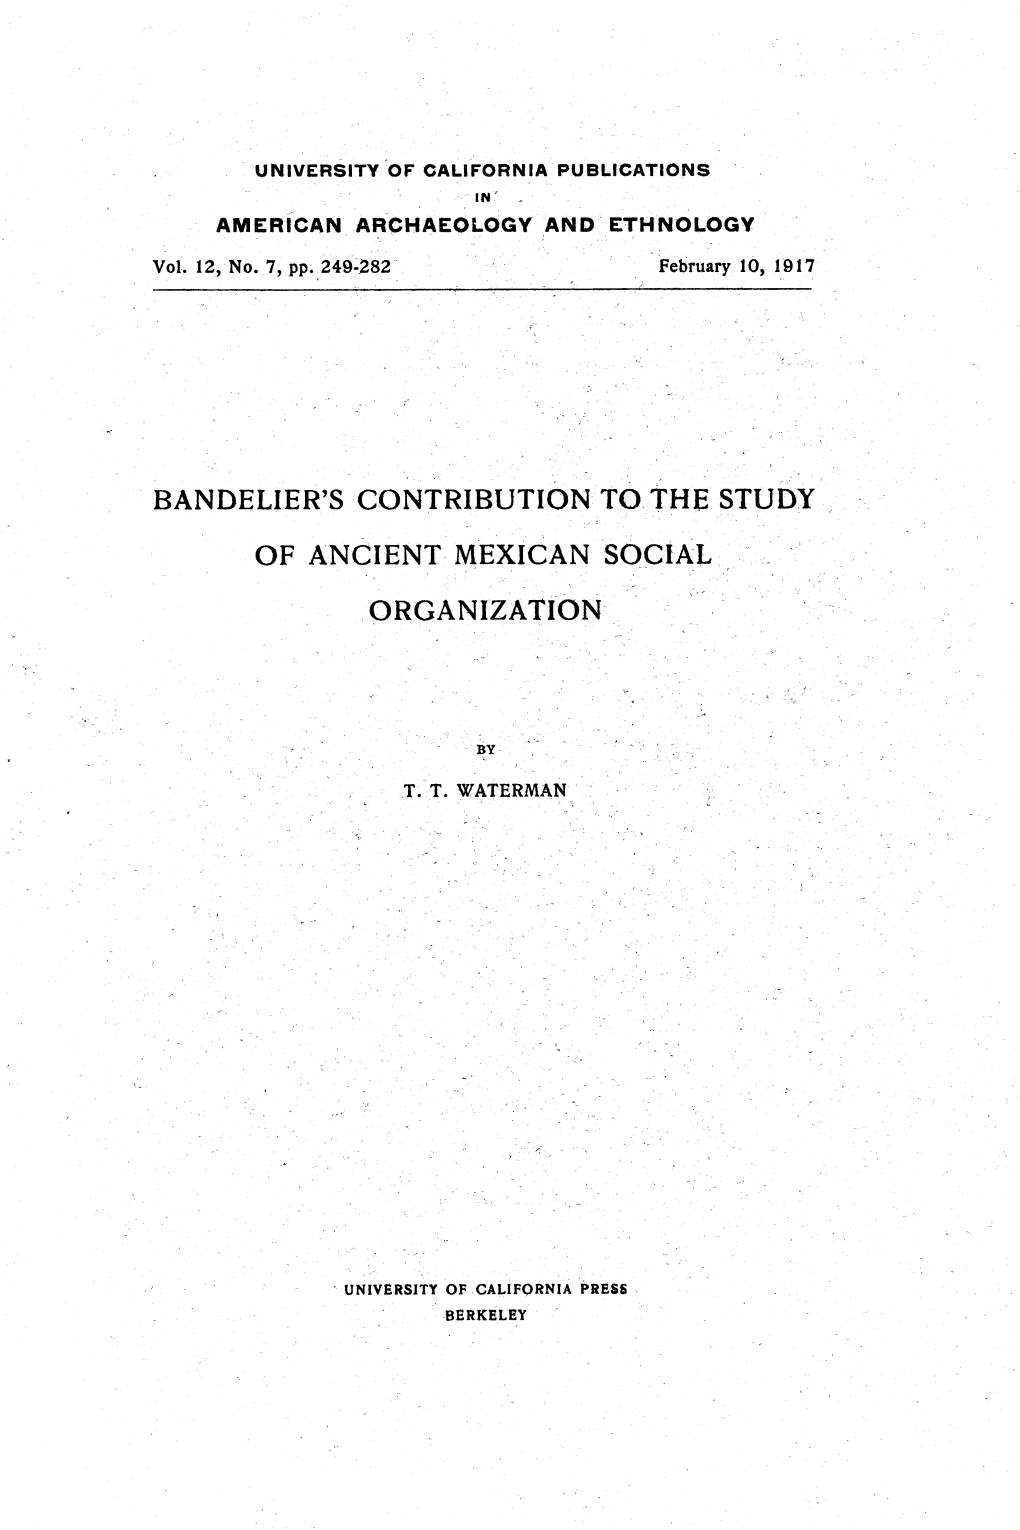 Bandelier's Contribution to the Study of Ancient- Mexican Social Organization